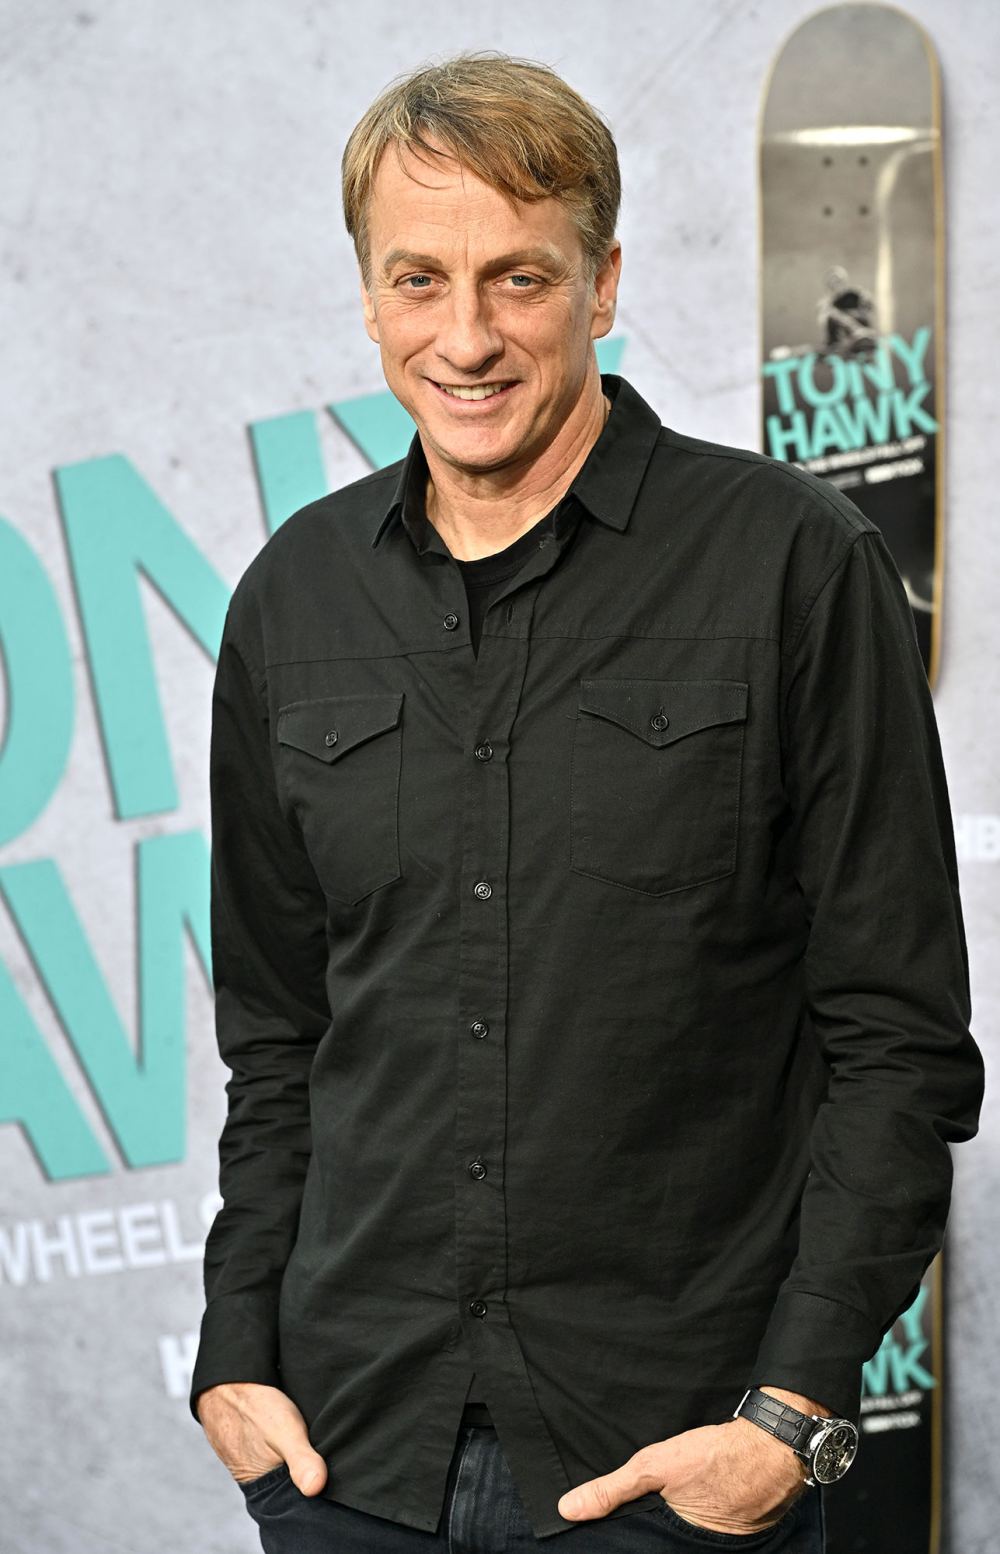 Tony Hawk: 25 Things You Don't Know About Me!